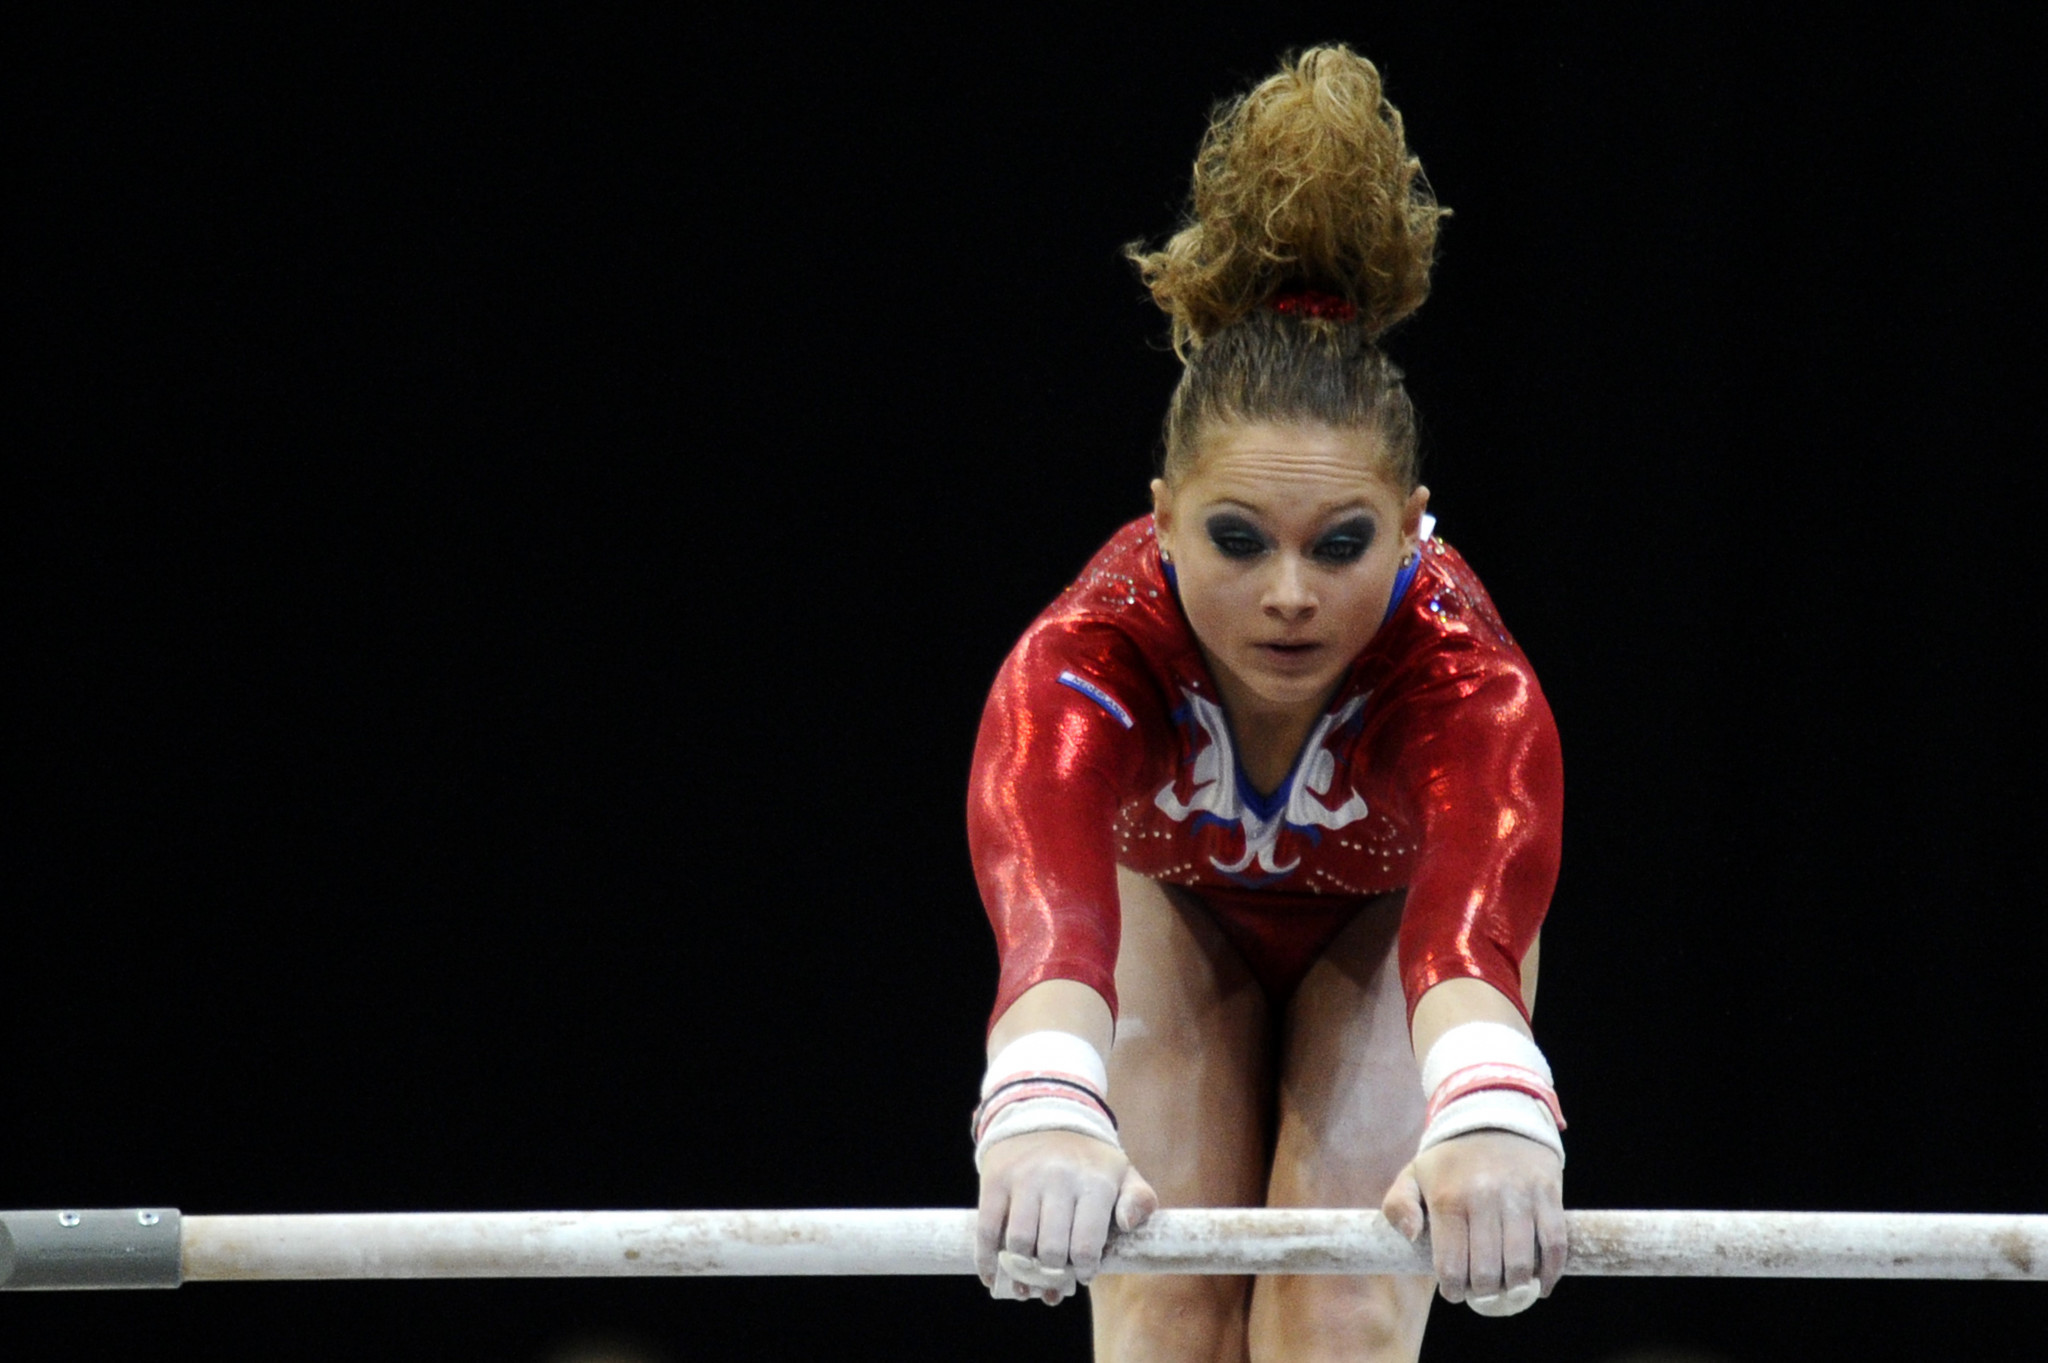 Joy Goedkoop is the latest gymnast to reveal experiences of abuse ©Getty Images